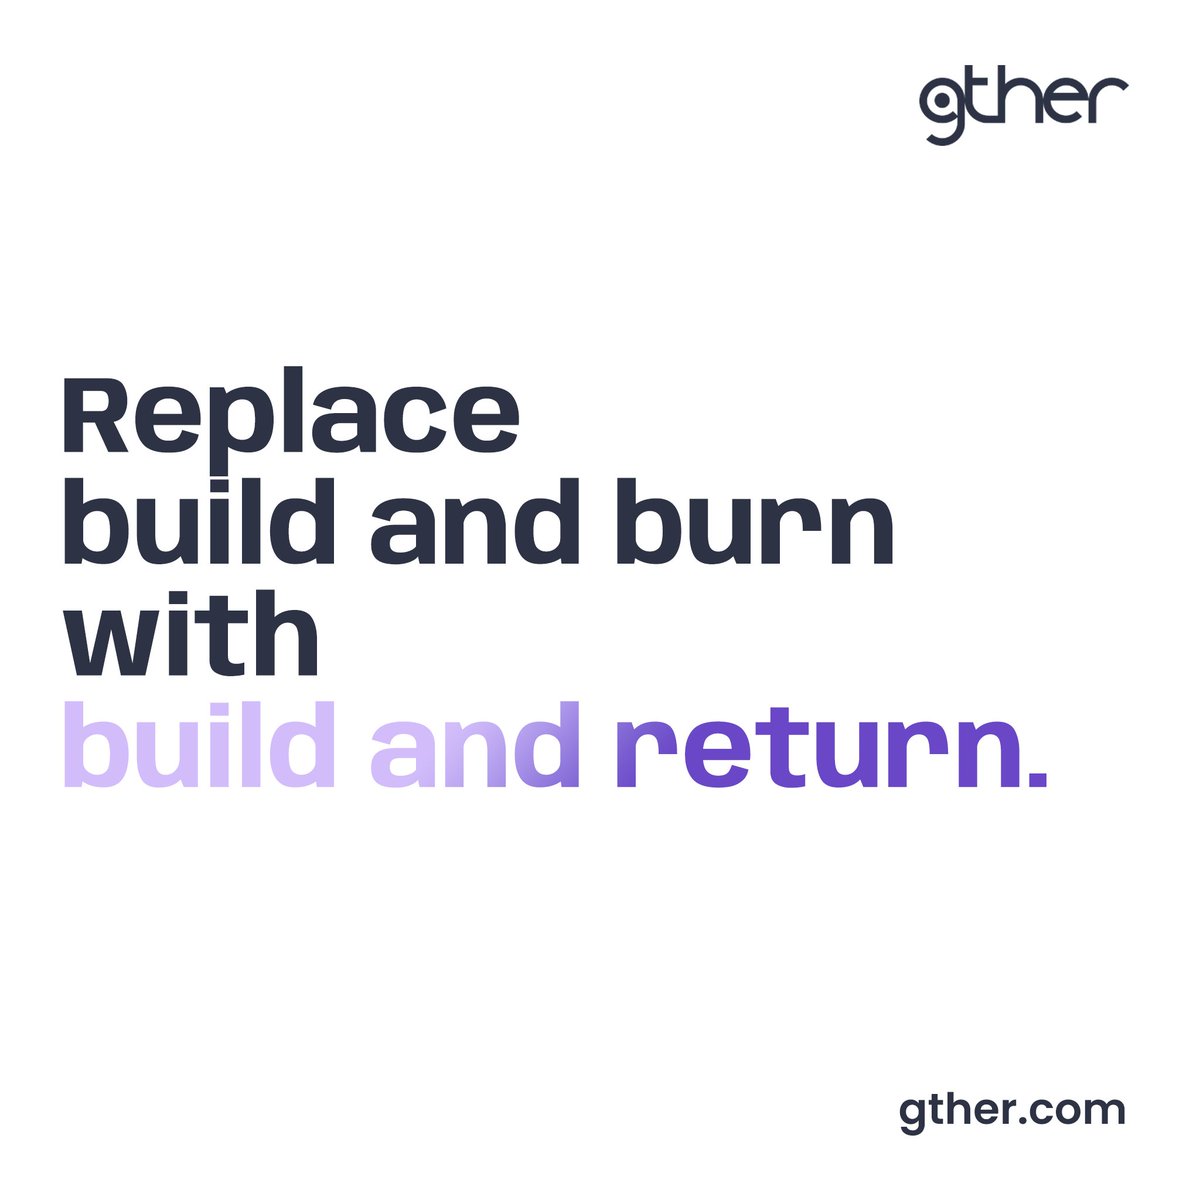 Encourage repeat encounters with gther. Empowering your events to leave a memorable imprint, even after the lights go out. #LastingImpressions #BuildandReturn